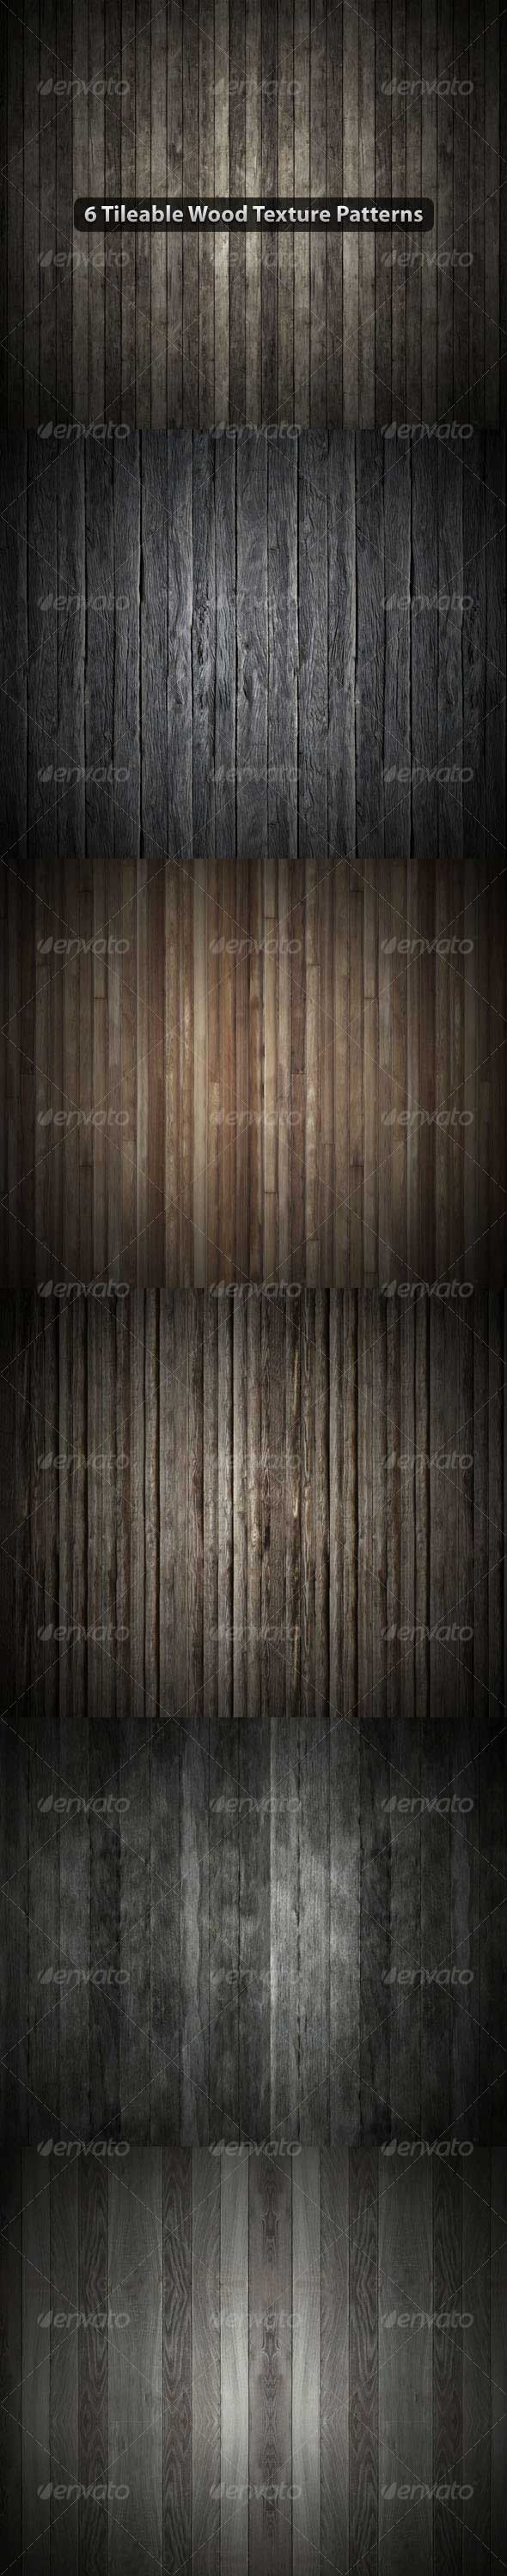 21 Unique Hardwood Floor Pattern Illustrator 2024 free download hardwood floor pattern illustrator of more than 350 free and premium wood textures with 6 tileable wood textures 6 textures seamless 5